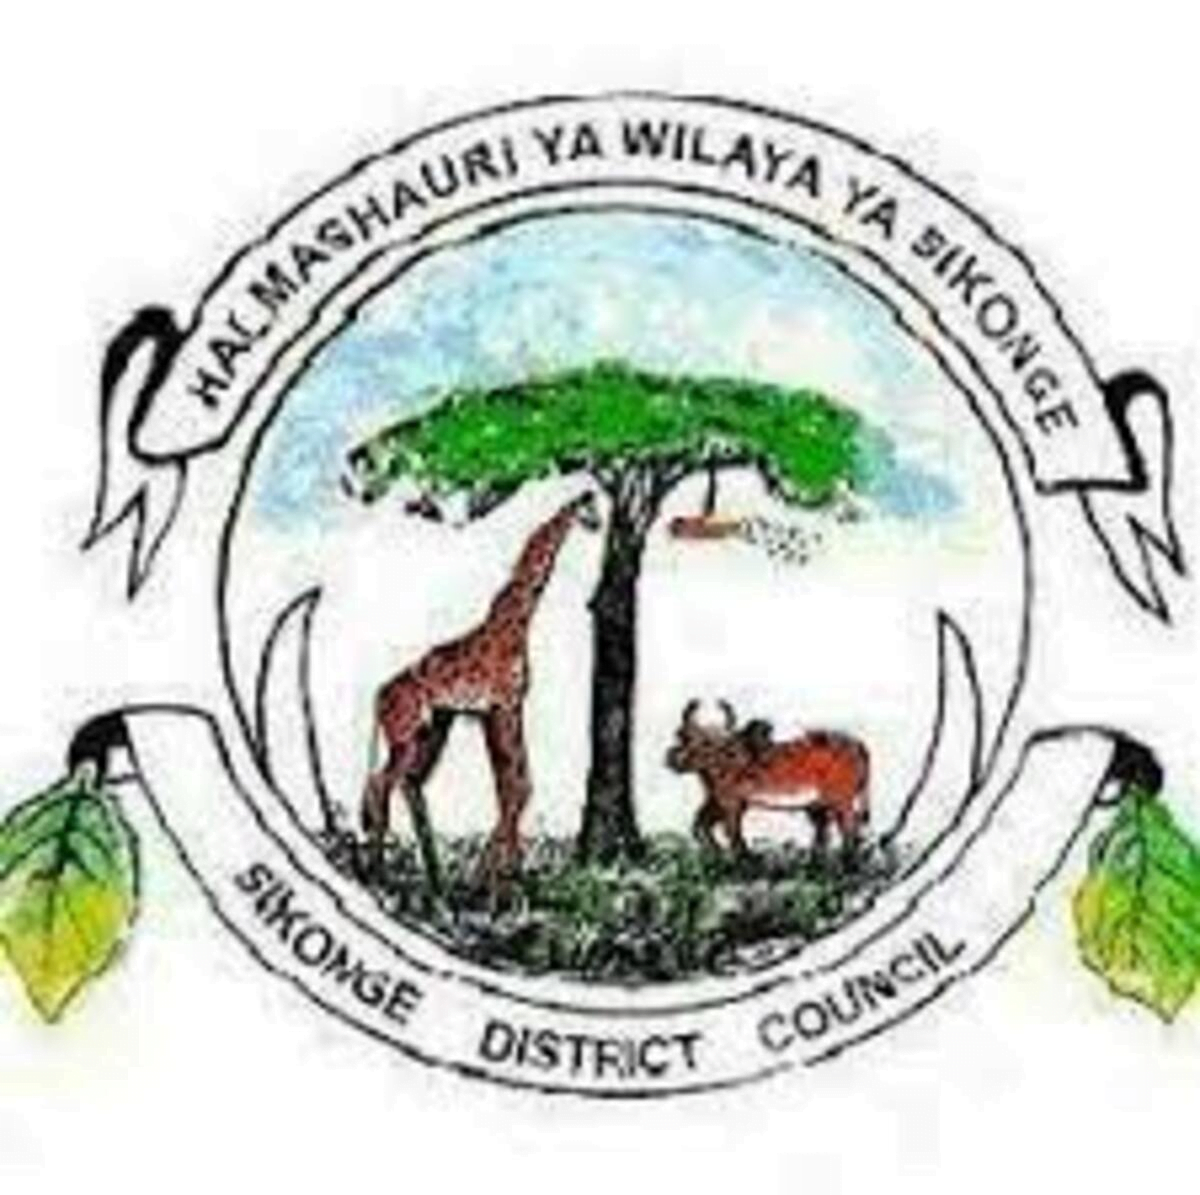 Job Opportunities at Sikonge District Council 2021, Sikonge District Council Jobs 2021, Nafasi za kazi HALMASHAURI Wilaya ya Sikonge 2021, Sikonge District Council Vacancies